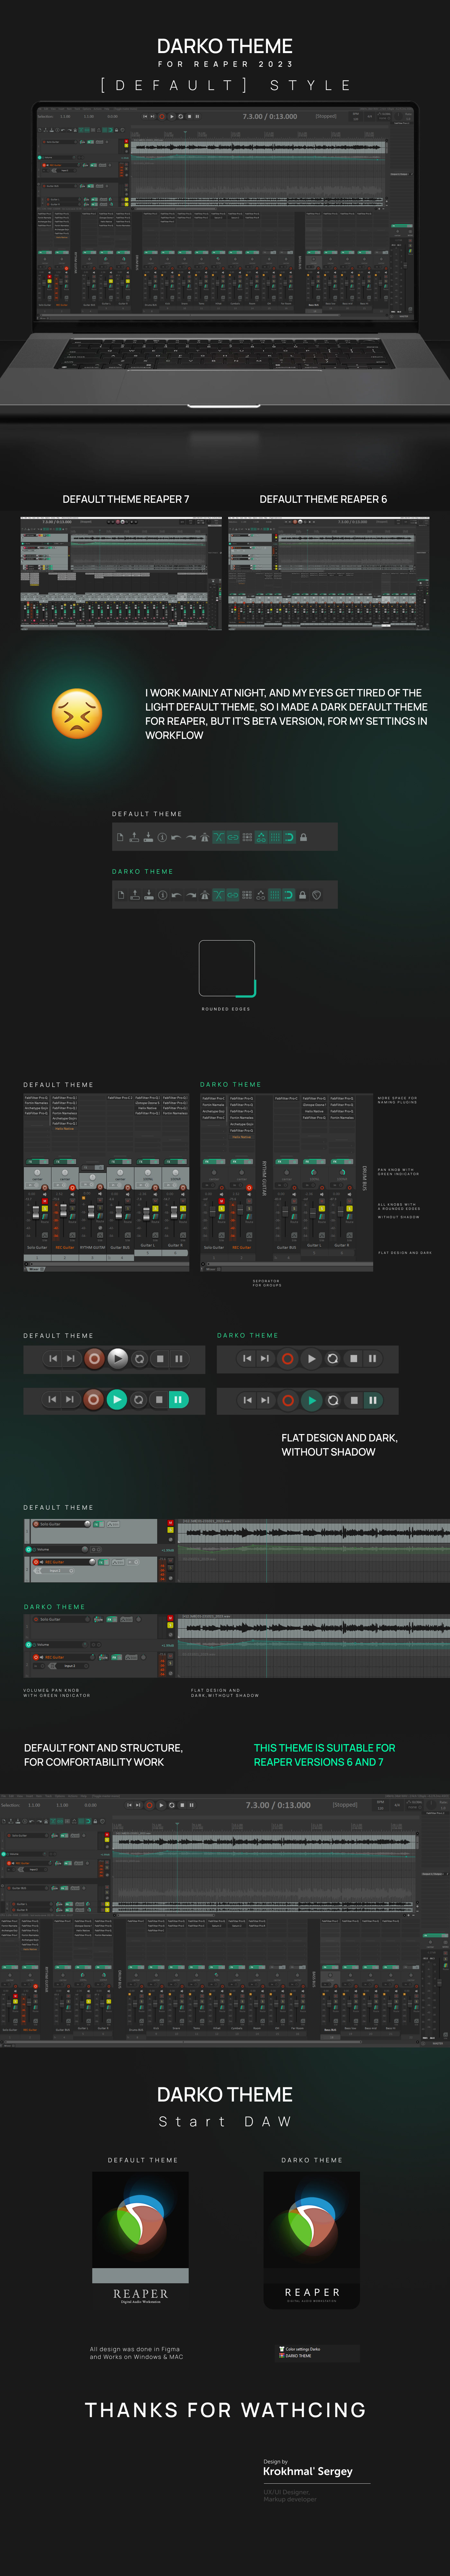 Development of a dark theme for DAW station REAPER Design of elements in flat style.